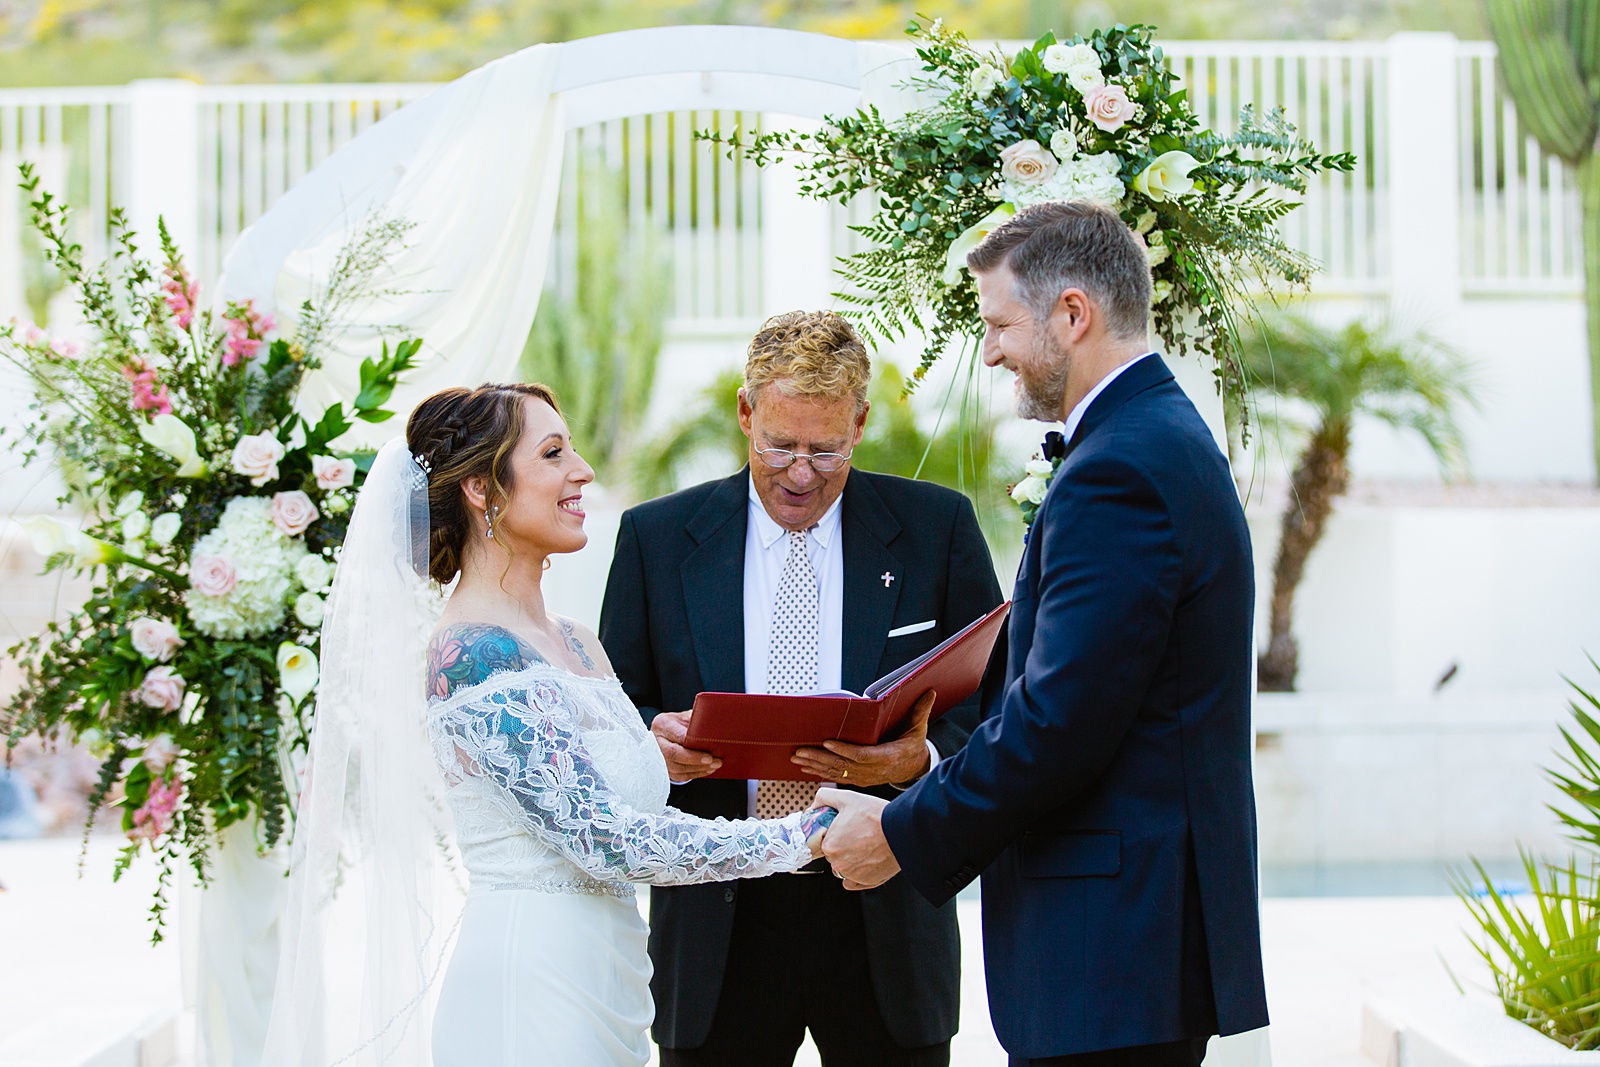 Bride and groom exchange vows during their backyard wedding ceremony by Scottsdale wedding photographer PMA Photography.